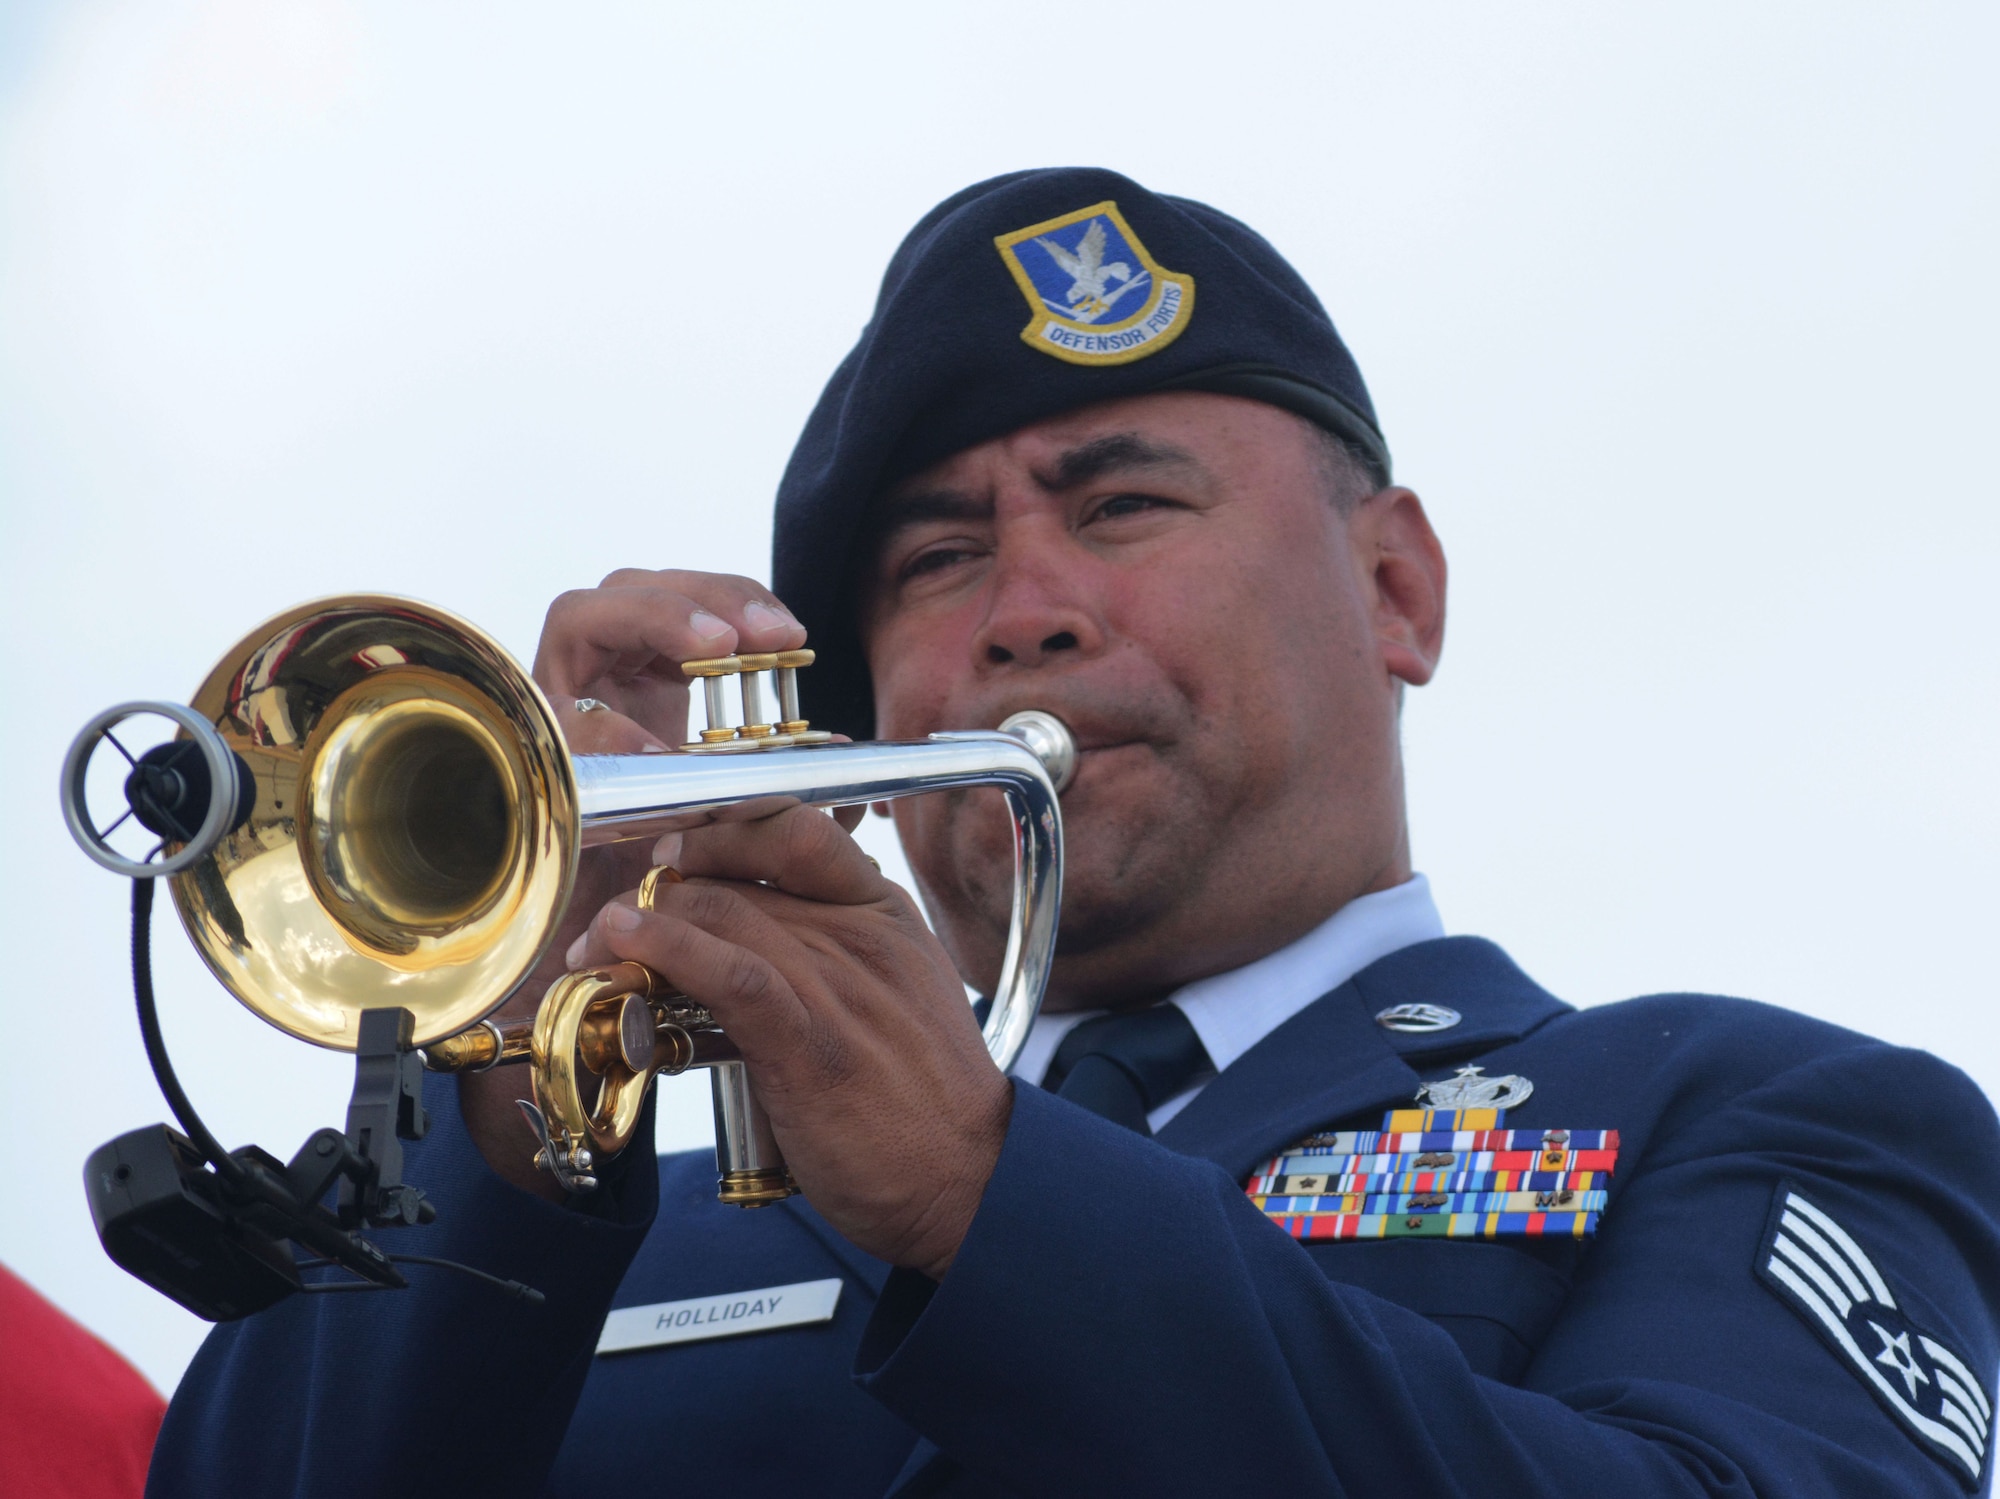 Staff Sgt. Johnny Holliday, 610th Security Forces Squadron, plays the National Anthem during the opening ceremony at this year's Air Power Expo at the Naval Air Station Fort Worth Joint Reserve Base, Texas. Saturday's total attendance was a single-day air show record for NAS Fort Worth JRB. (U.S. Air Force photo/Staff Sgt. Samantha Mathison)